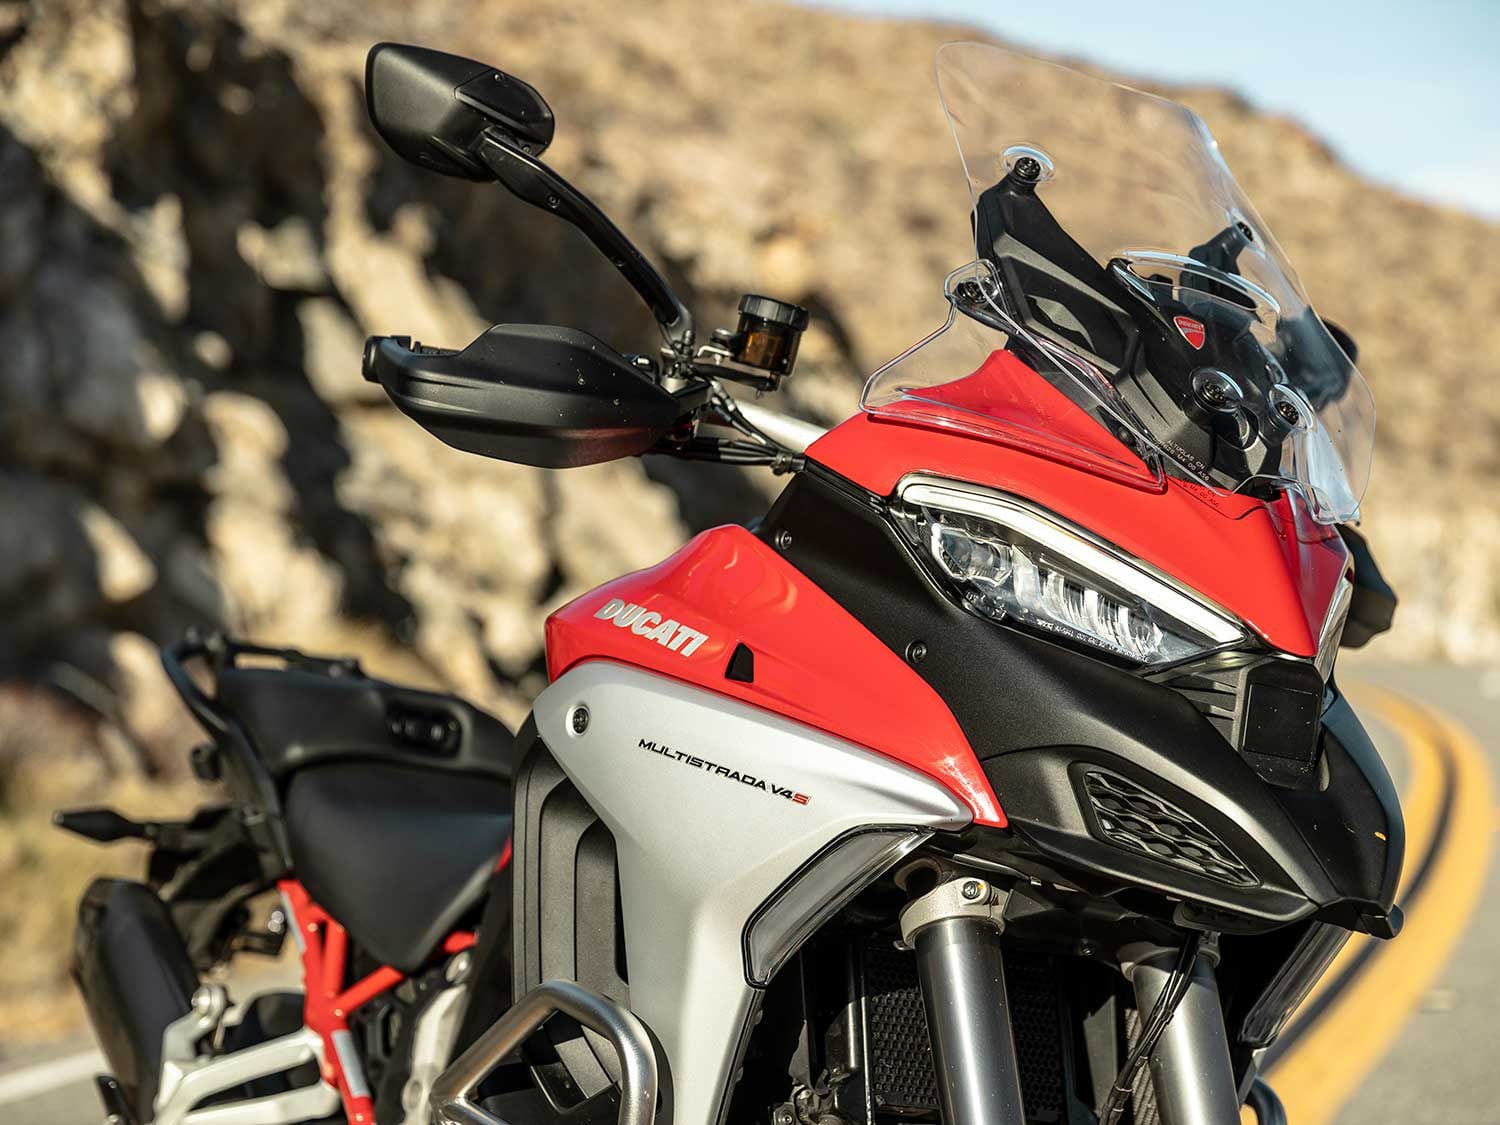 The Multistrada V4 benefits from adaptive cruise control which allows it to maintain pace with a vehicle that is ahead of it. The electronics perform as advertised and make for a more enjoyable riding experience.